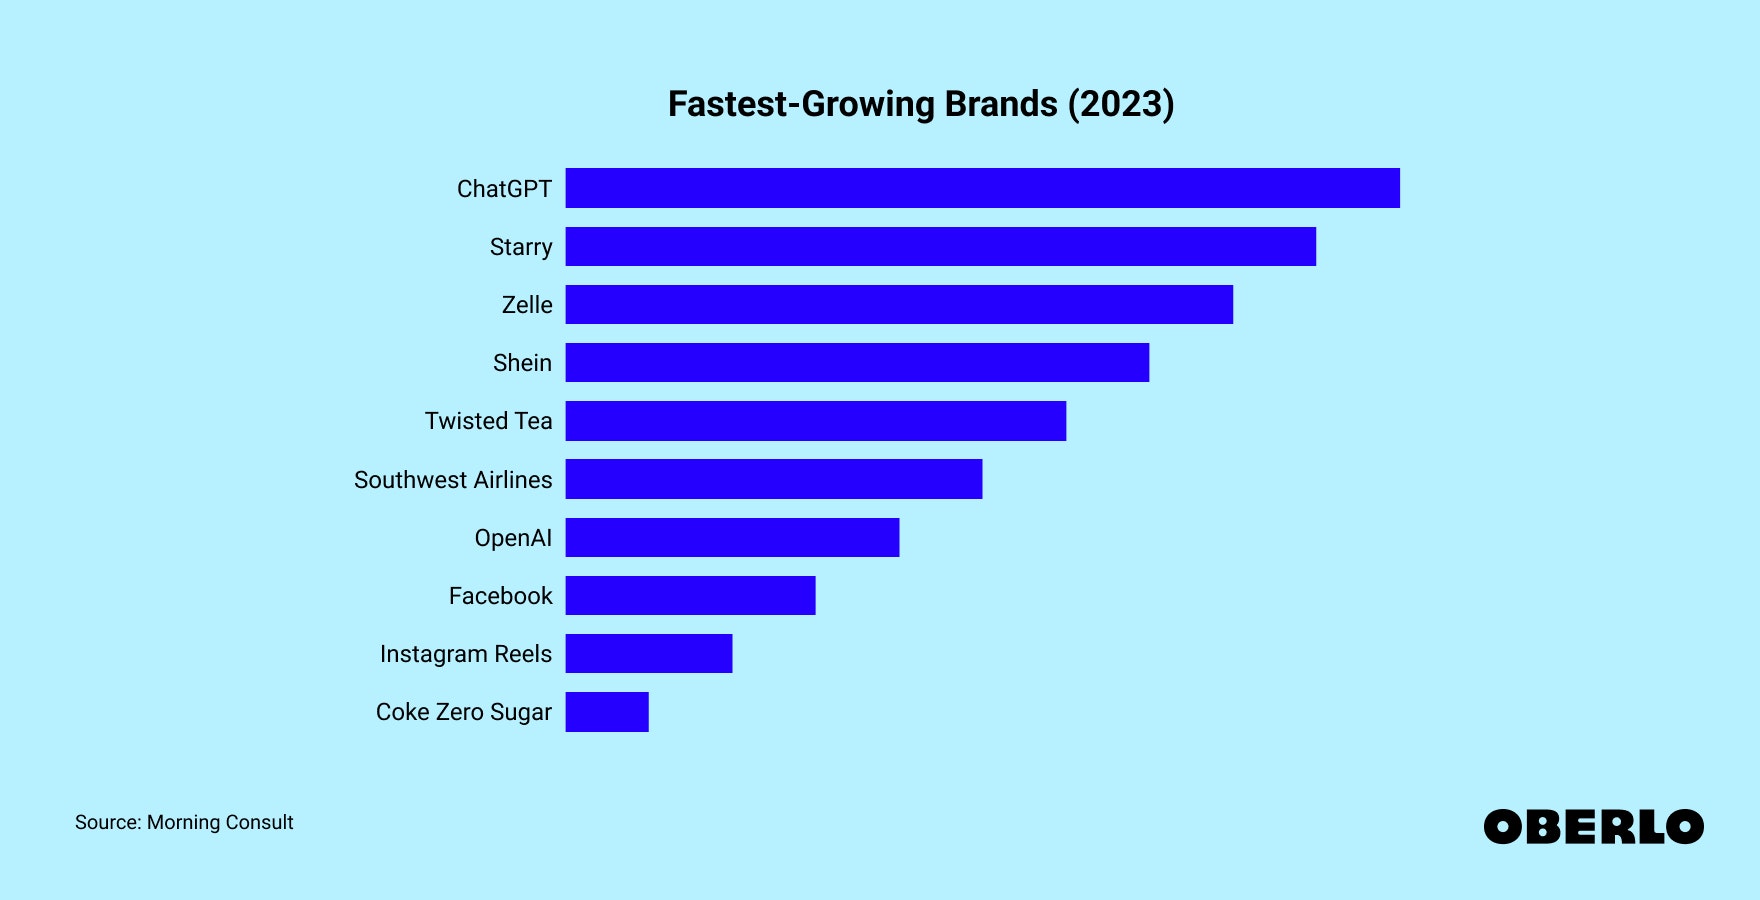 Chart showing: Fastest-Growing Brands in 2023